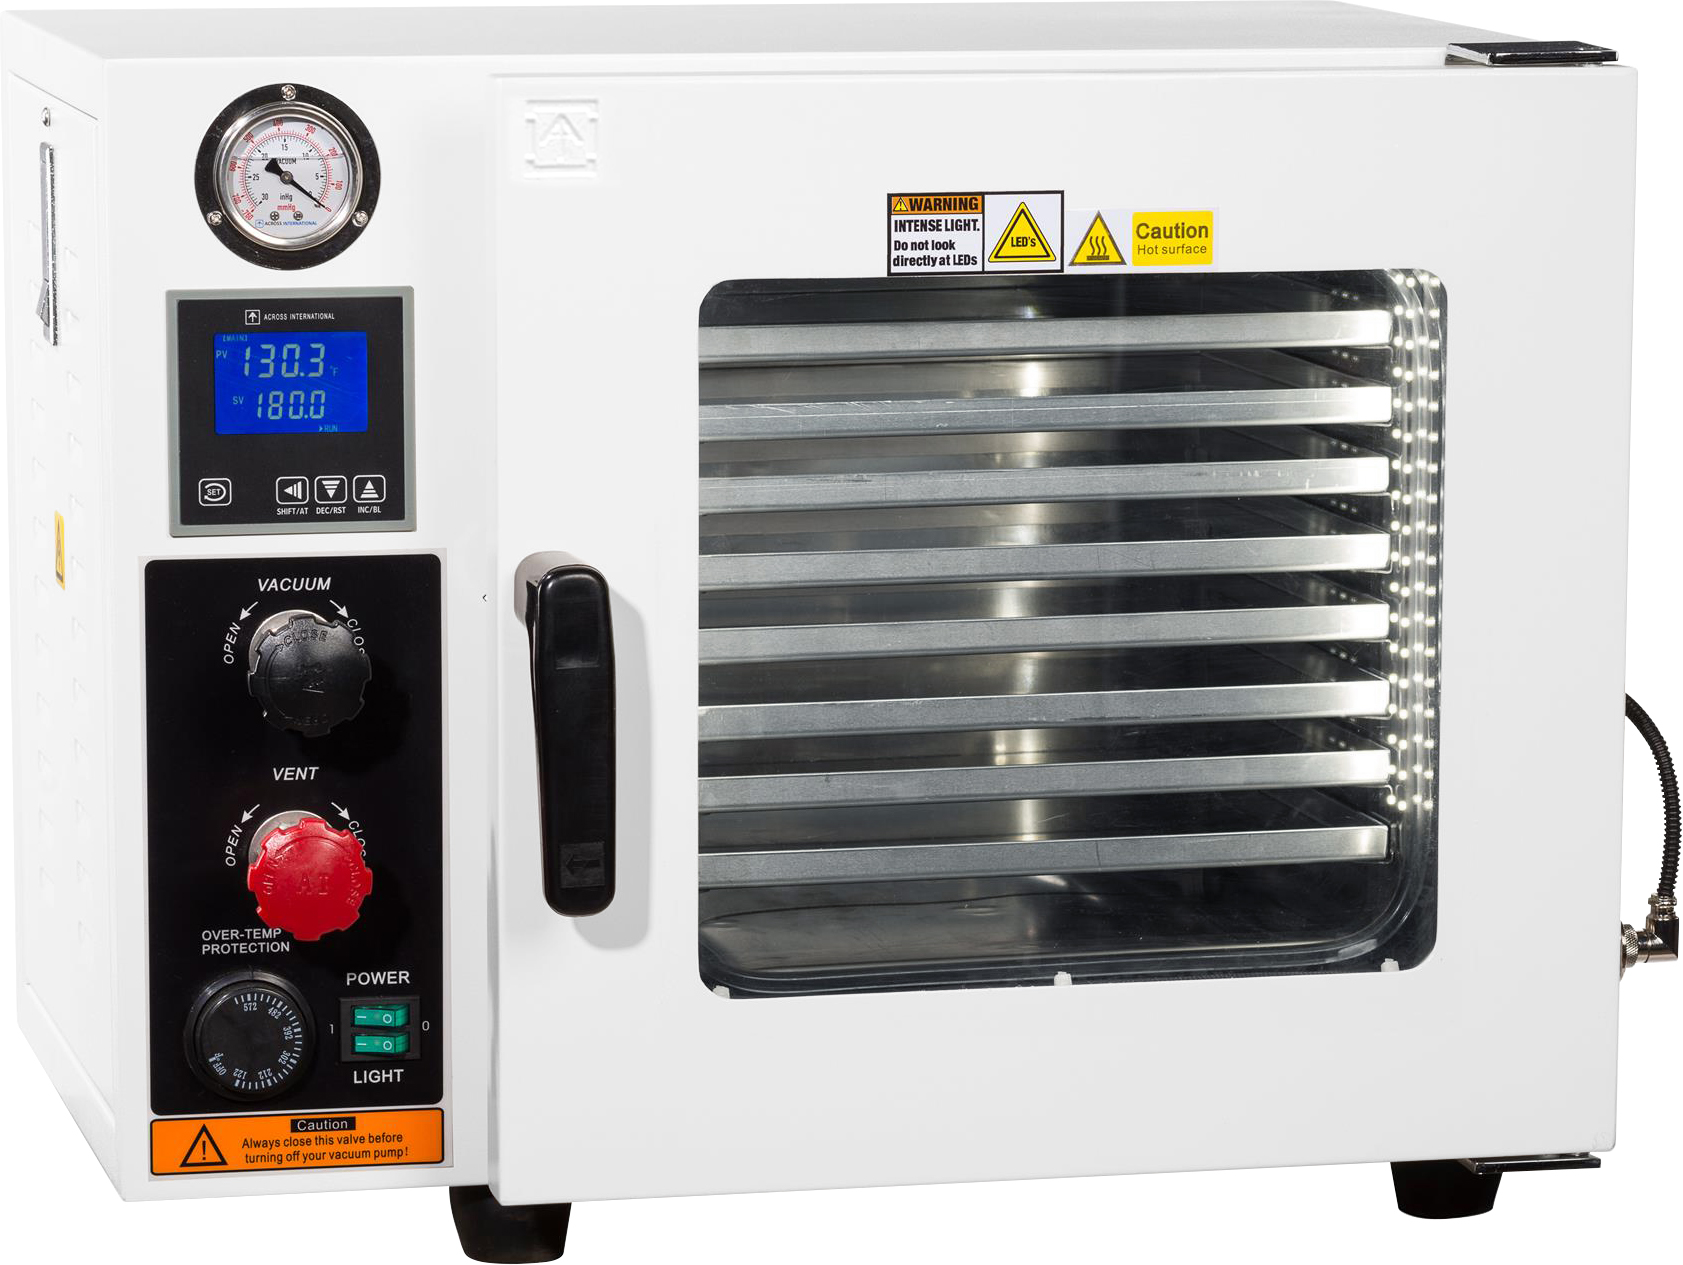 AccuTemp 0.9 cubic feet 250°C Vacuum Oven with 5 Sided Heat